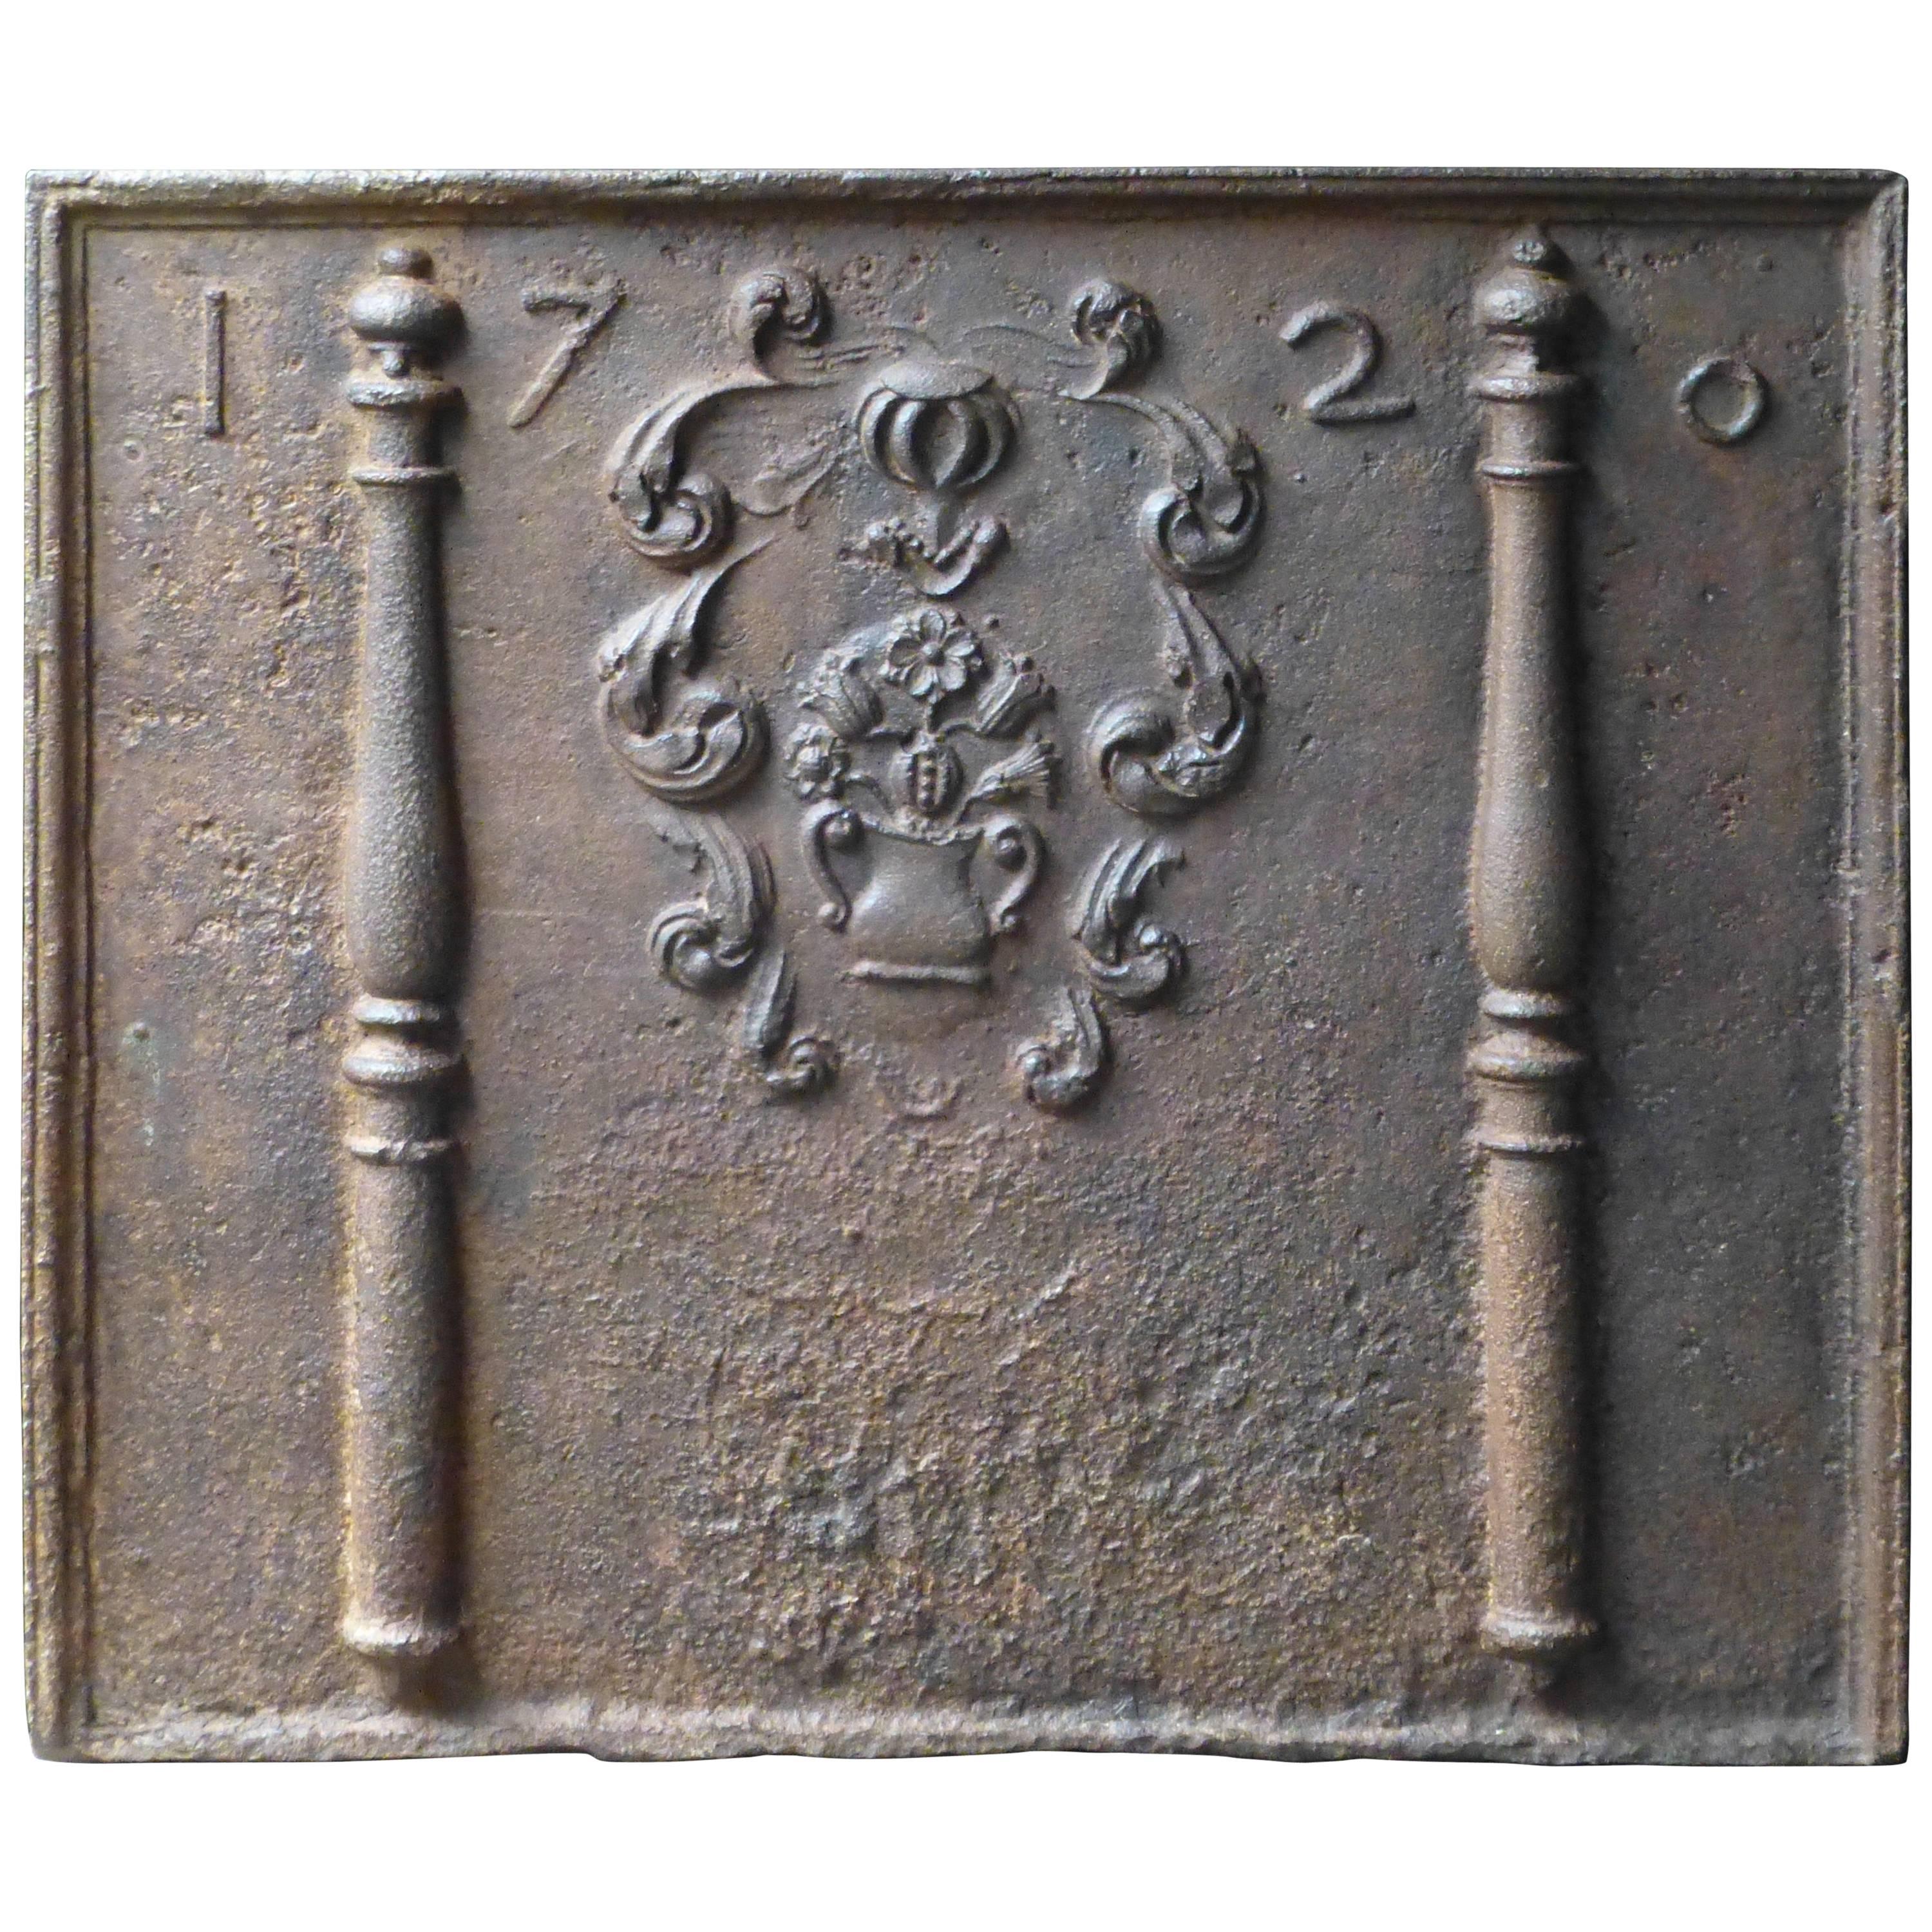 Magnificent French 'Coat of Arms' Fireback / Backsplash, Dated 1720